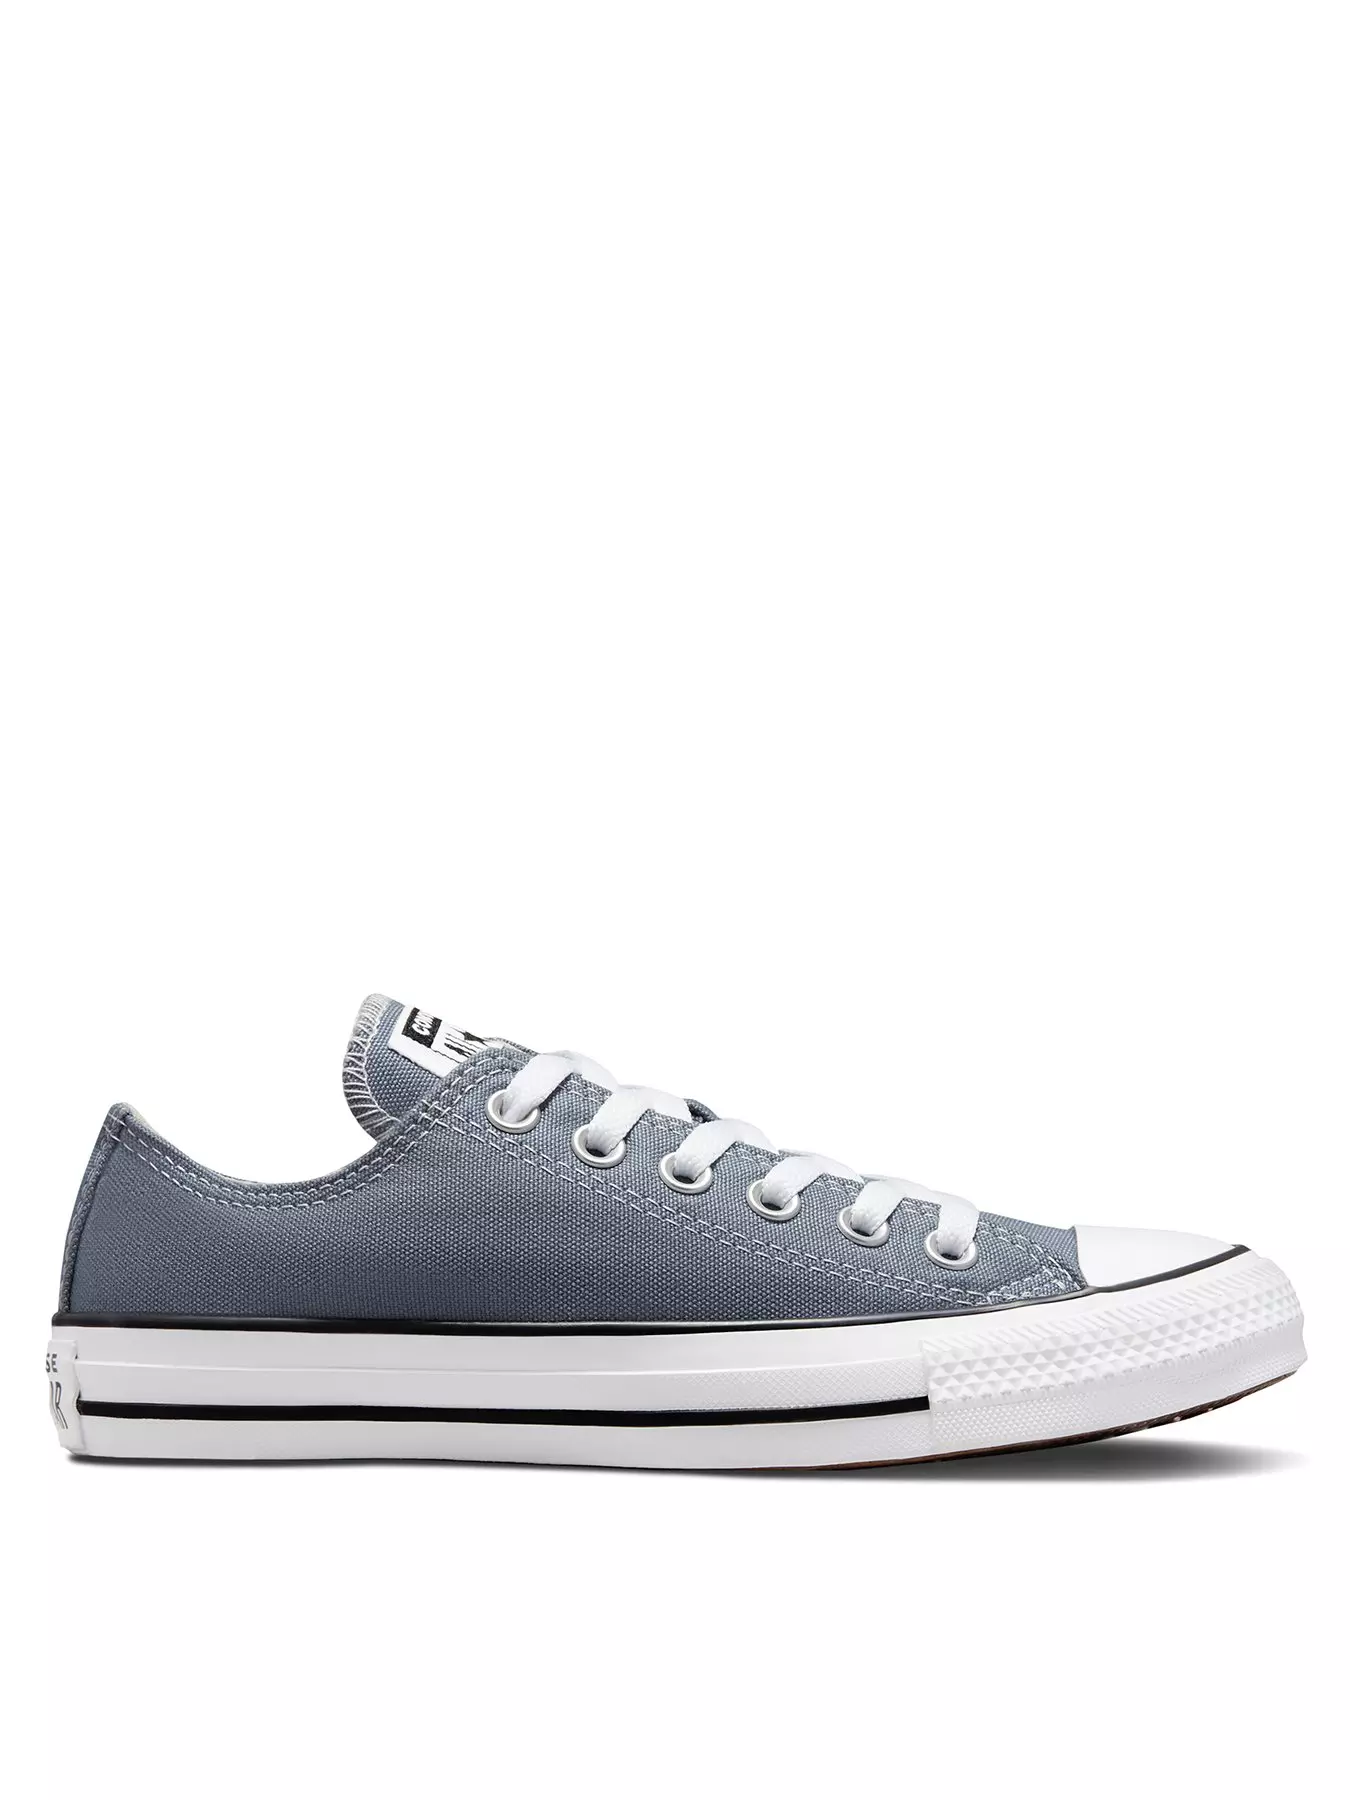 Minimizar Potencial cosecha Converse Shoes, Trainers & Clothing | High Tops | Very Ireland